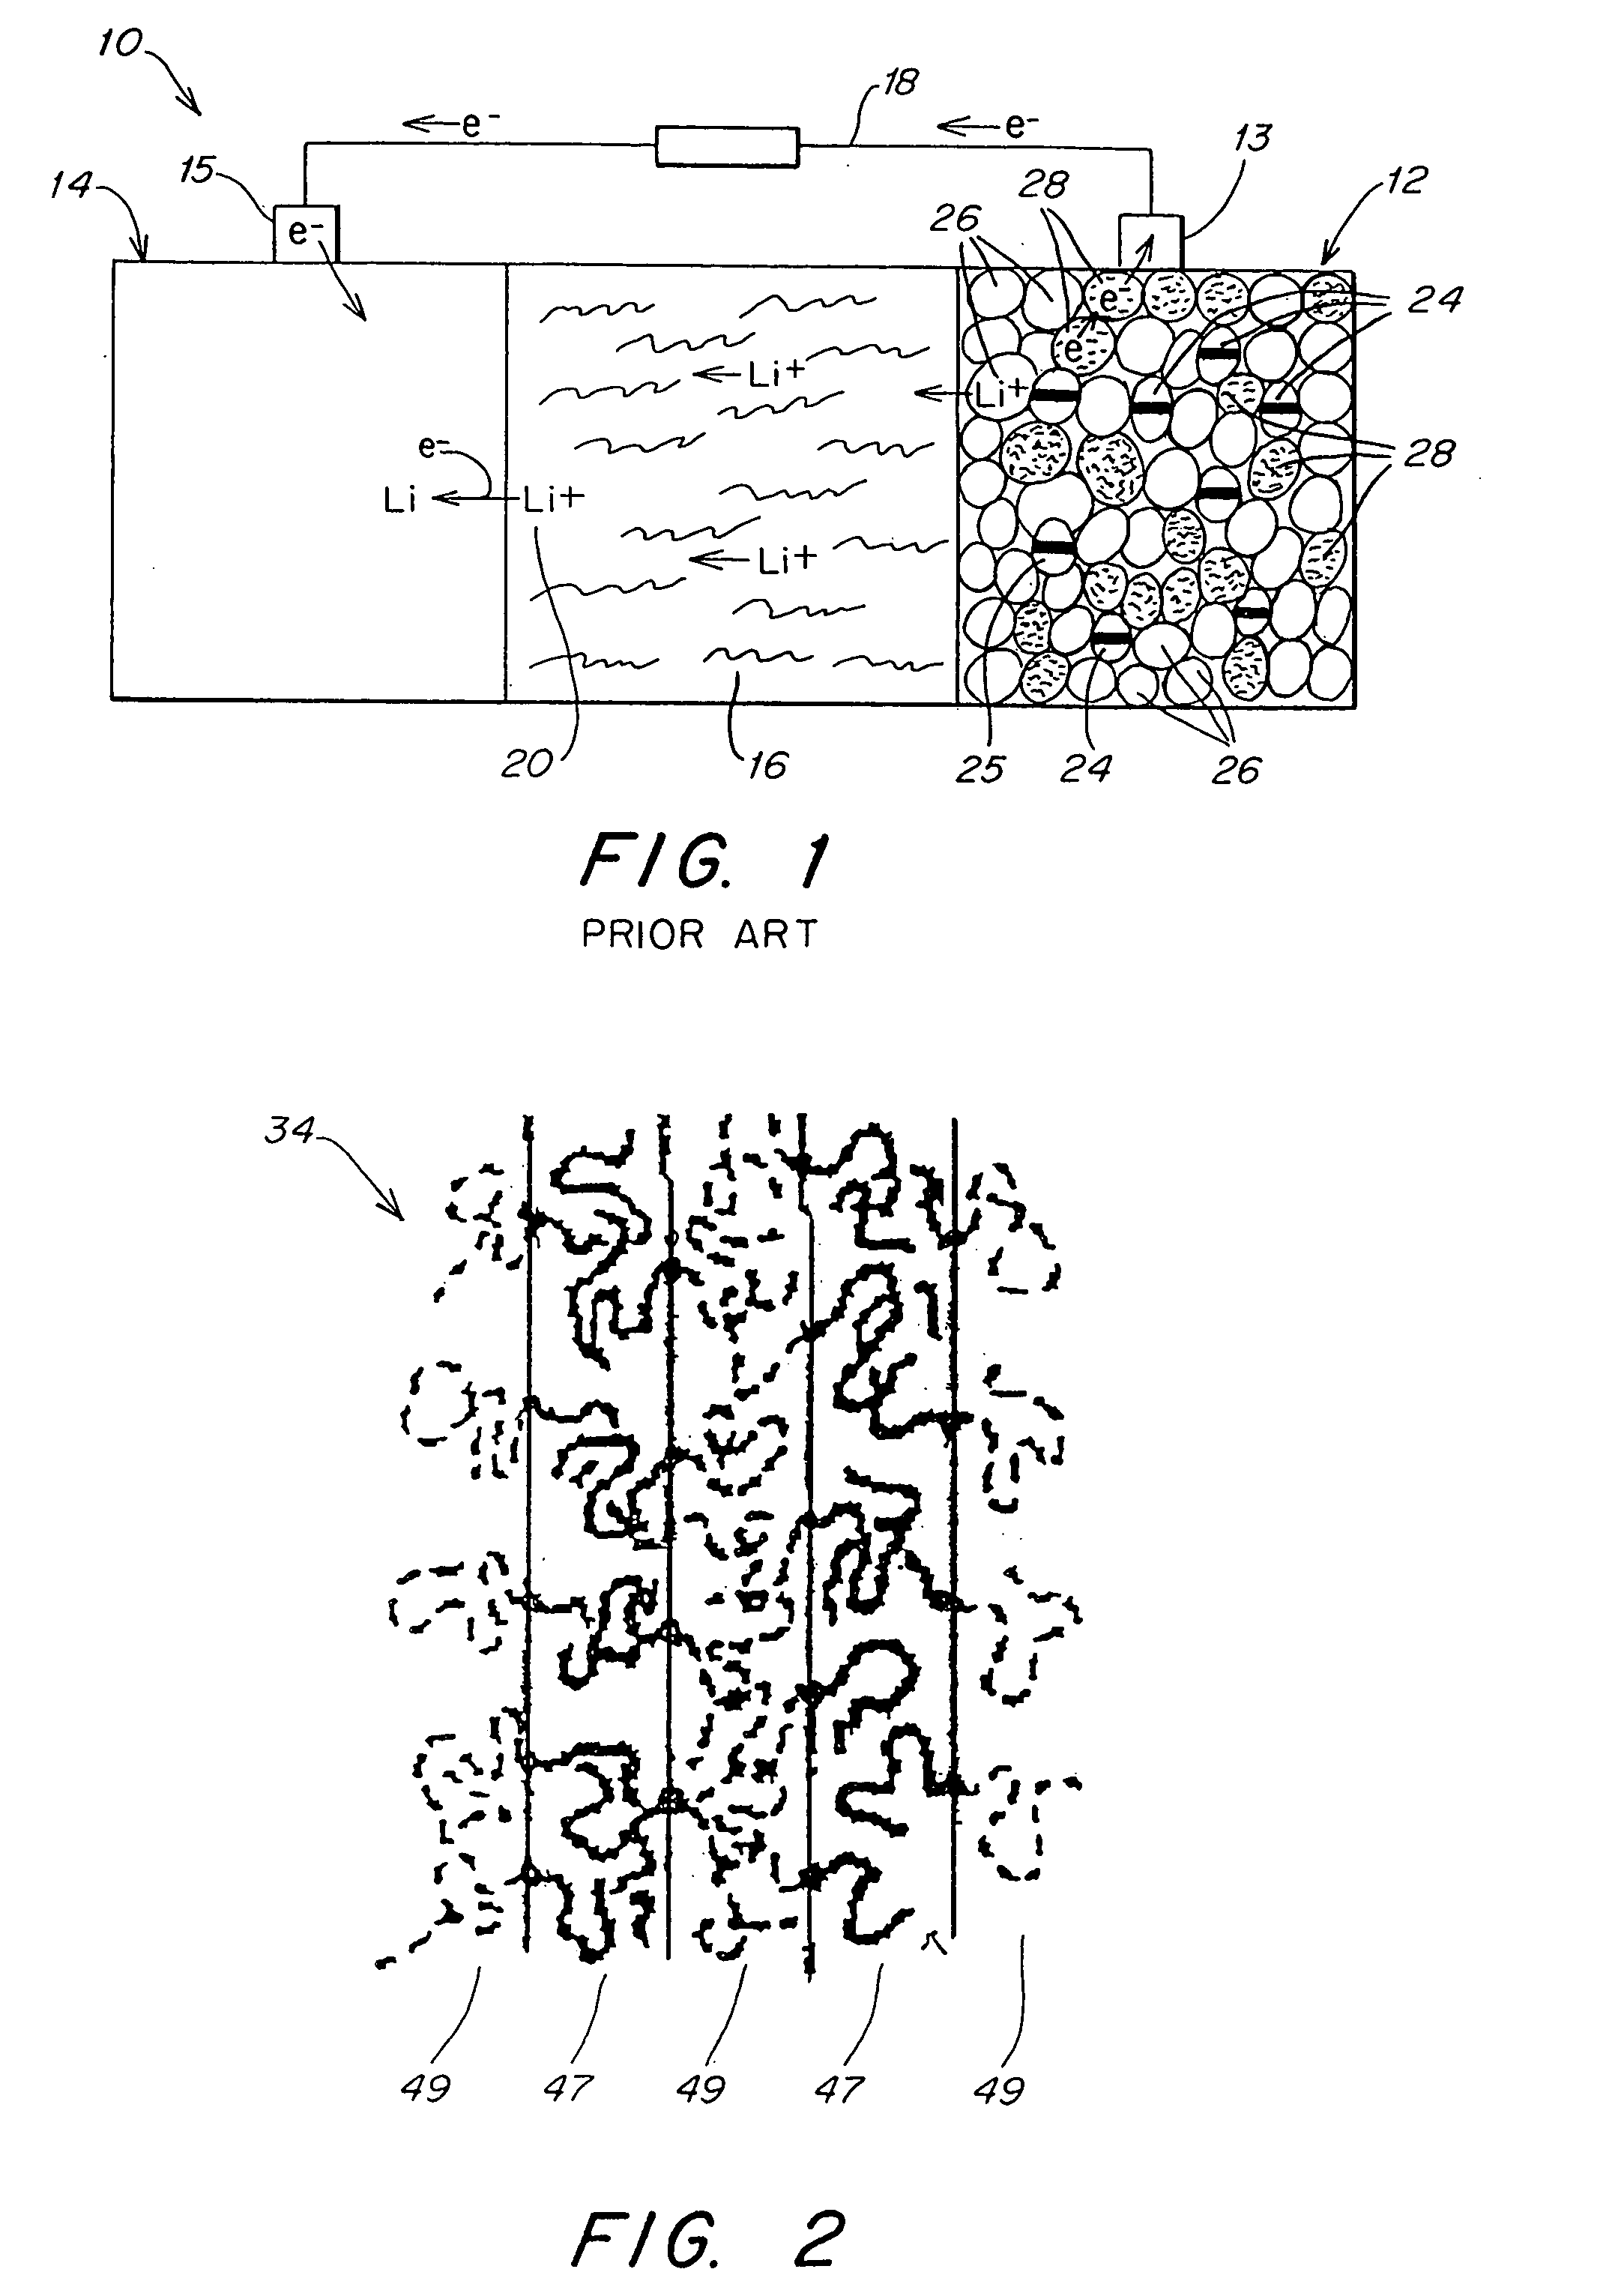 Polymer electrolyte, intercalation compounds and electrodes for batteries